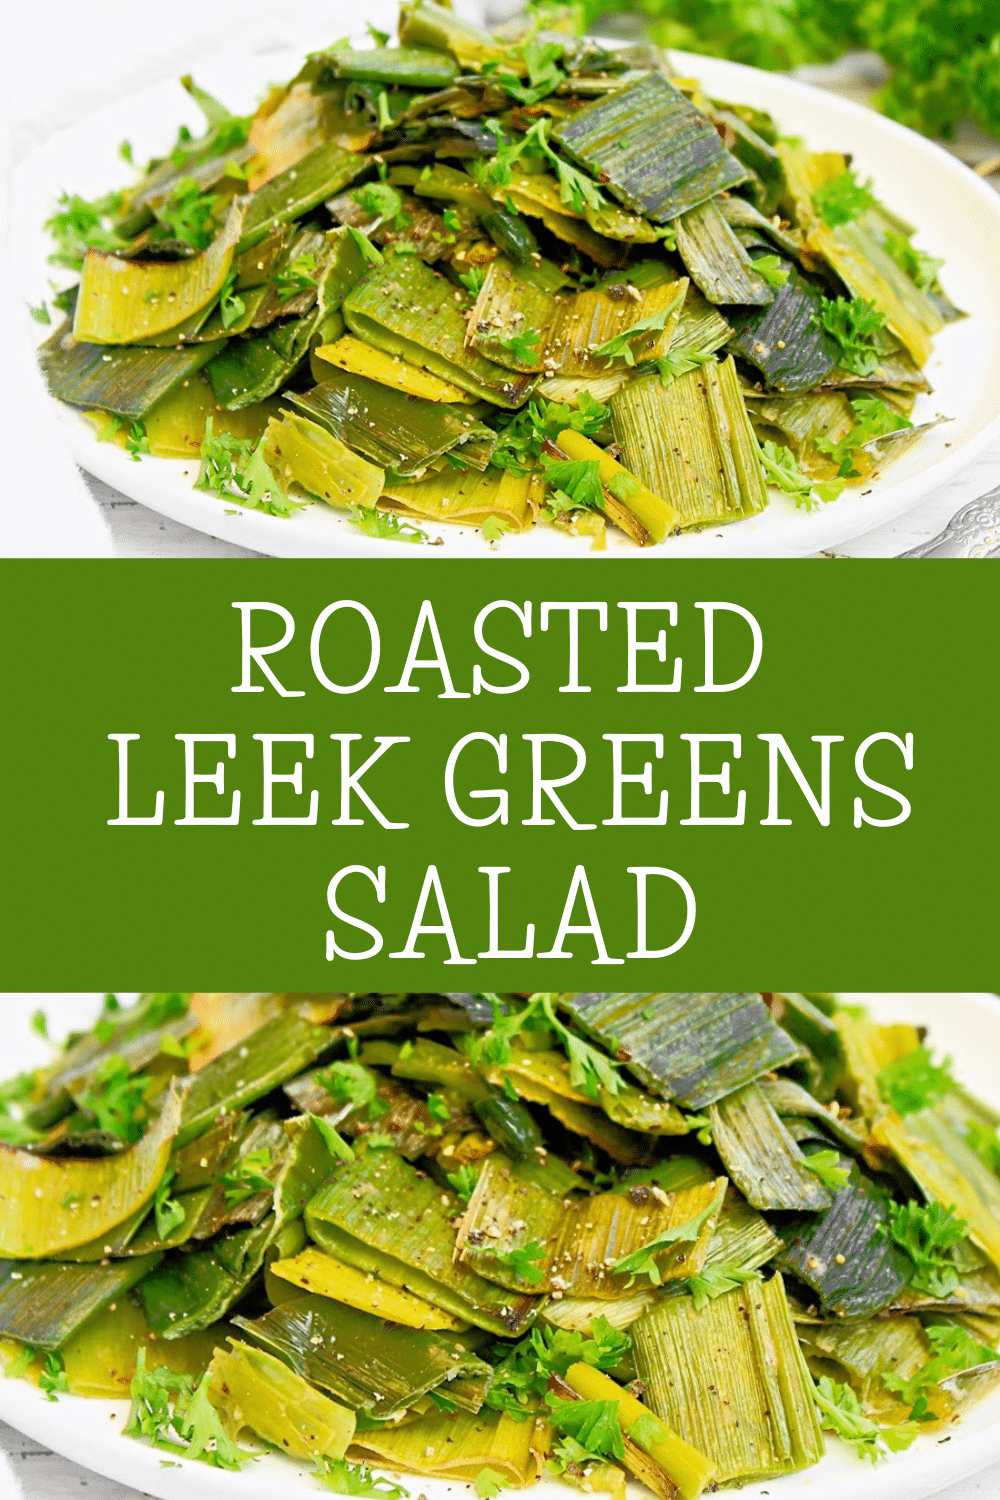 Looking for a warm and satisfying salad recipe that's packed with flavor and nutrients? This roasted leek greens salad is the perfect option! Made with caramelized leeks and a tangy 2-ingredient dressing, this salad is a delicious and healthy way to satisfy your cravings. Perfect for a cozy dinner or a light lunch, this roasted leek greens salad is a must-try recipe that you'll come back to again and again! via @thiswifecooks